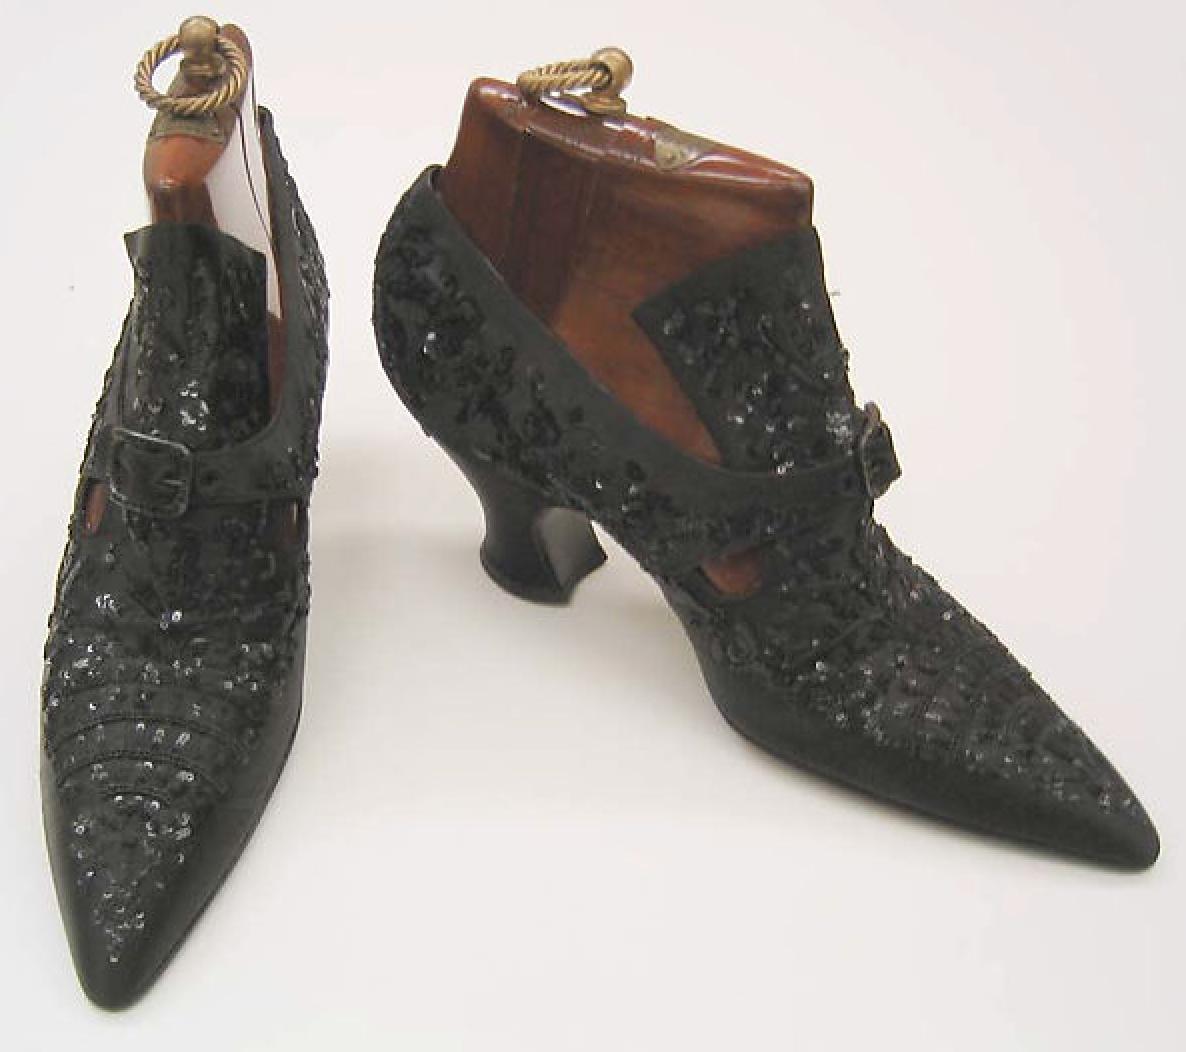 Anne Louise Avery on X: Black silk boots with floral embroidery. Jean-Louis  François Pinet, 1880s. Pinet's footwear was famous for its exquisite  embroidery and delicate 'Pinet' heel.  / X